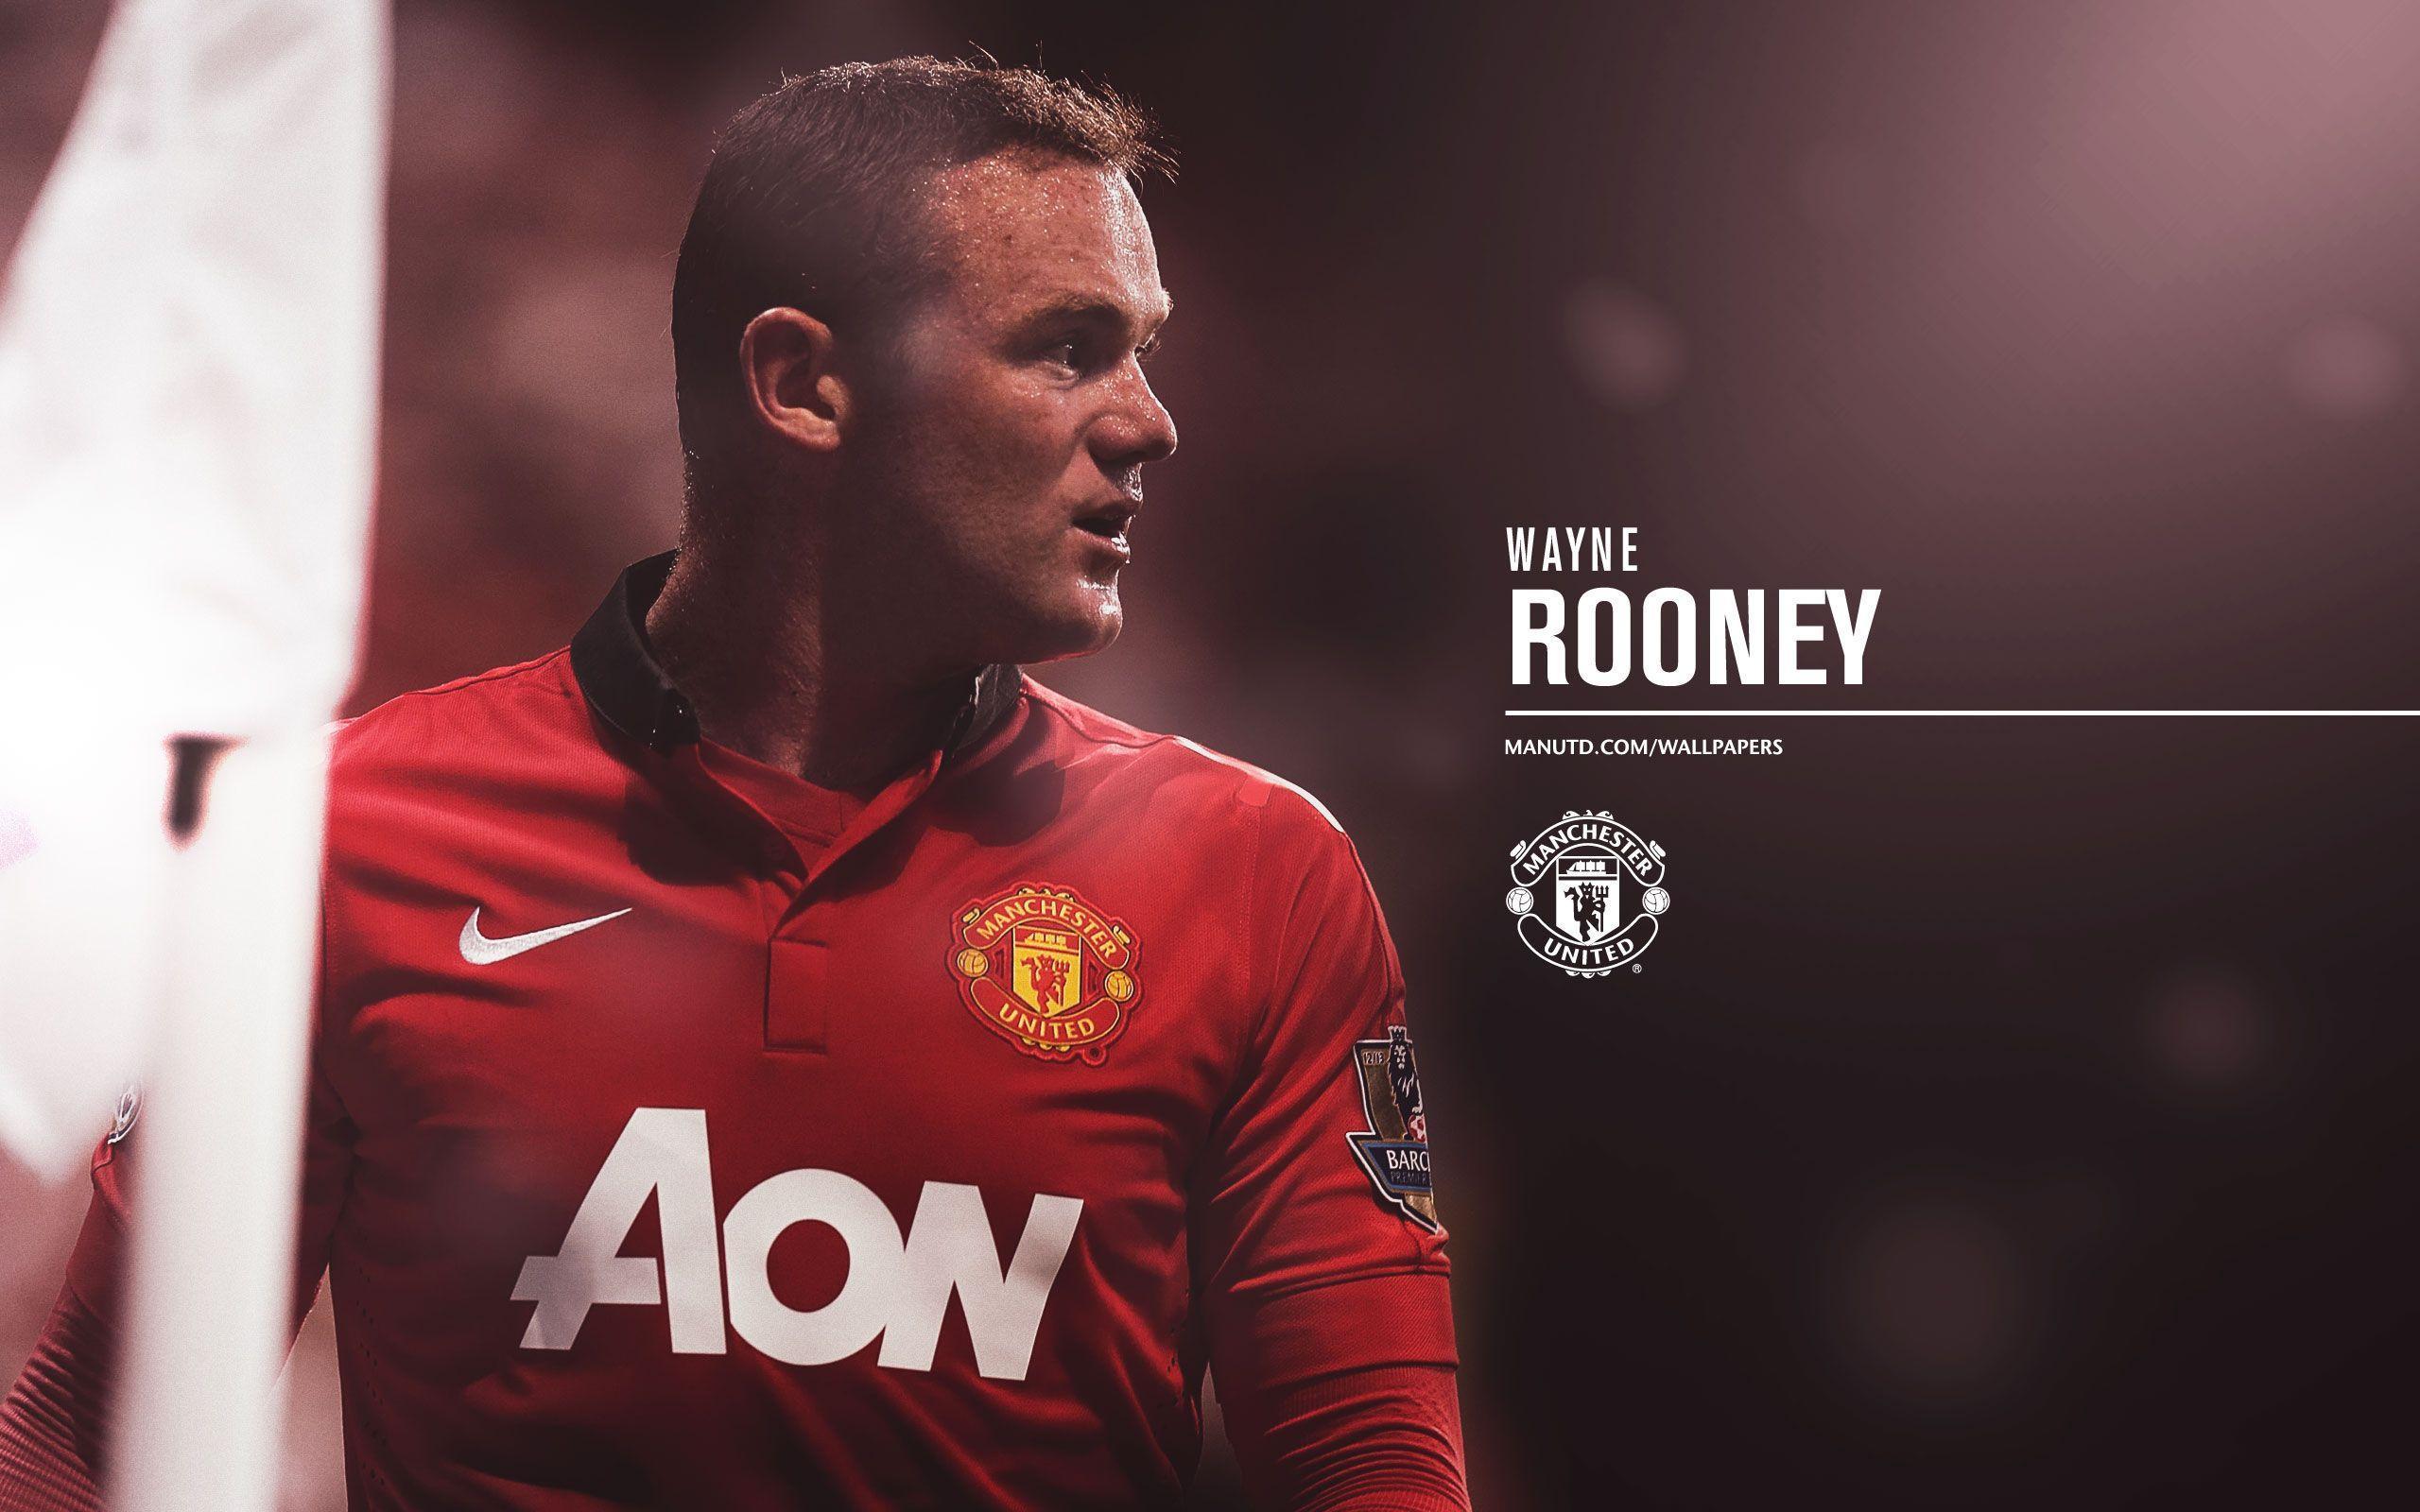 Manchester United Player Wayne Rooney (id: 128368)